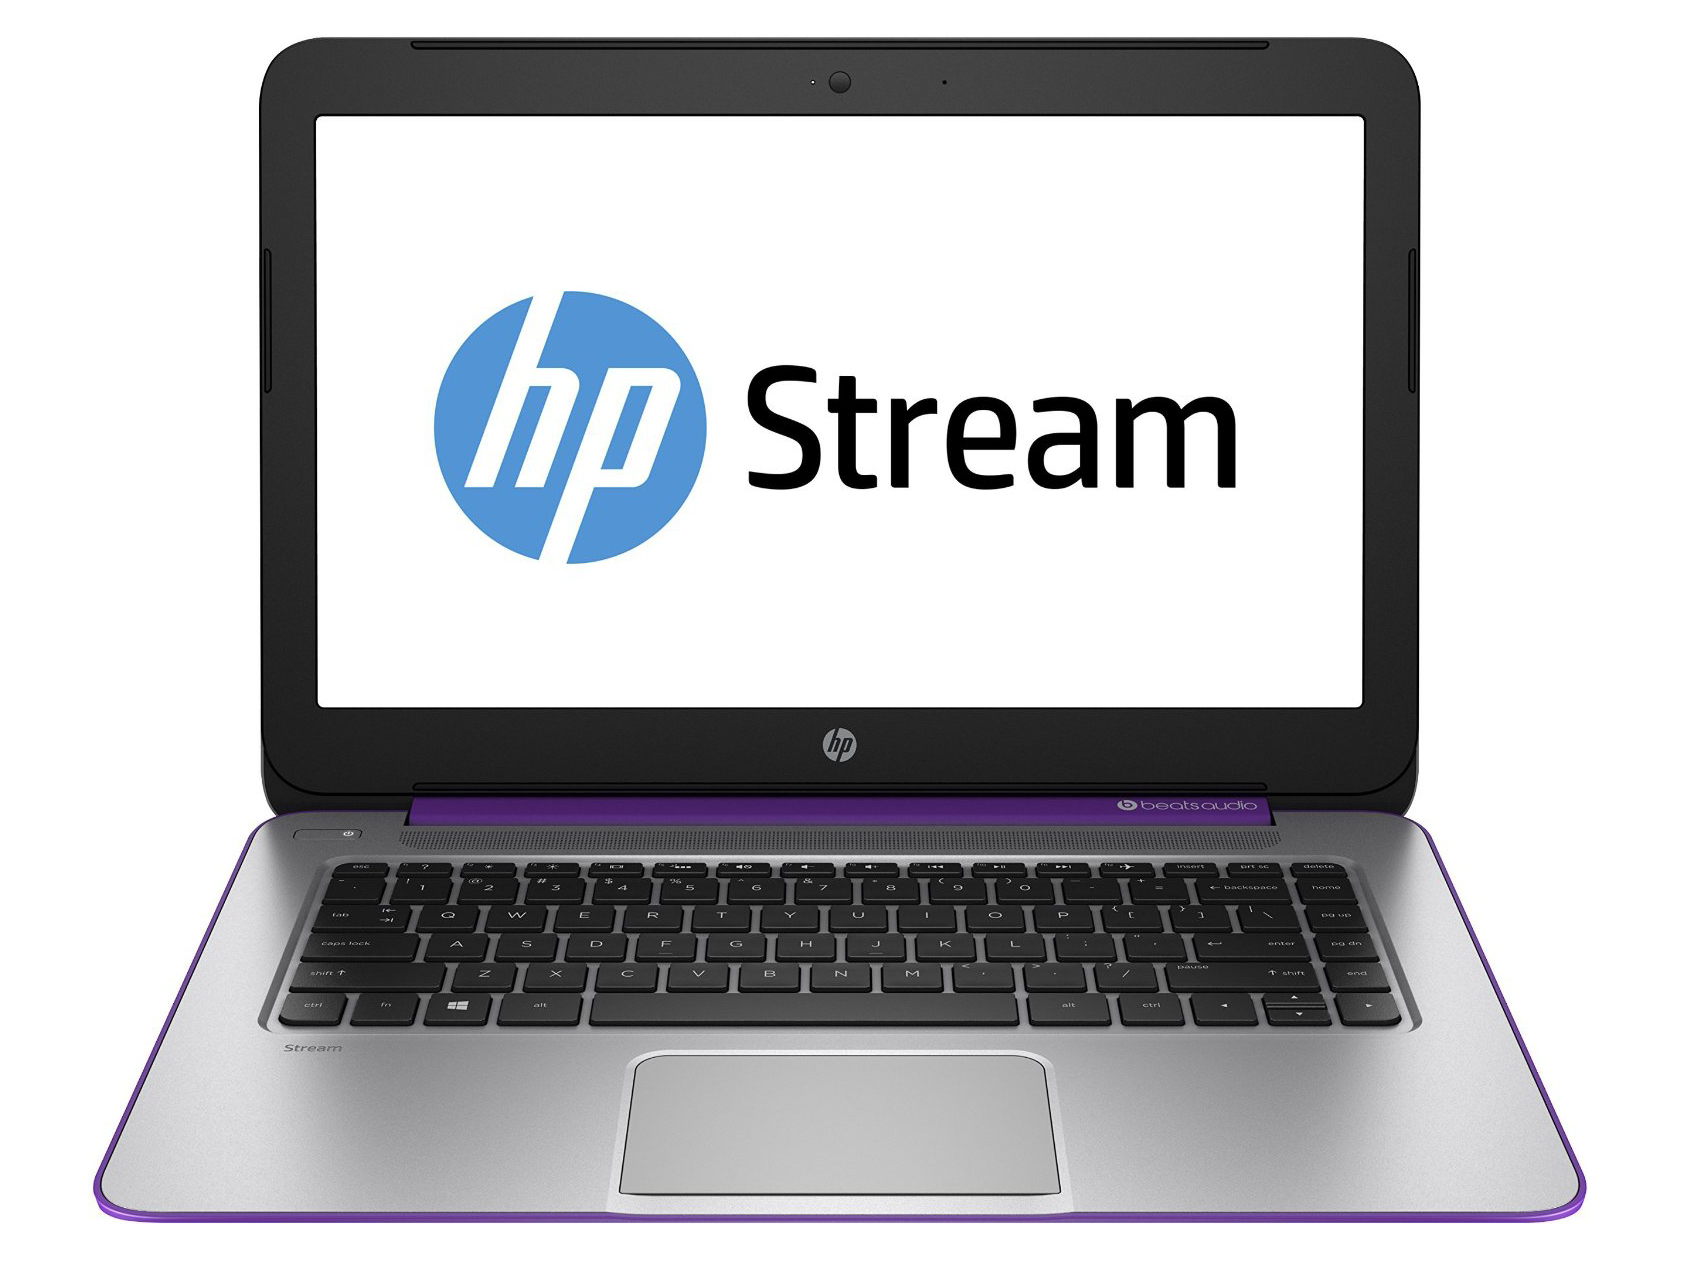 HP Stream 14 review: This laptop's best feature is its rock-bottom price -  CNET